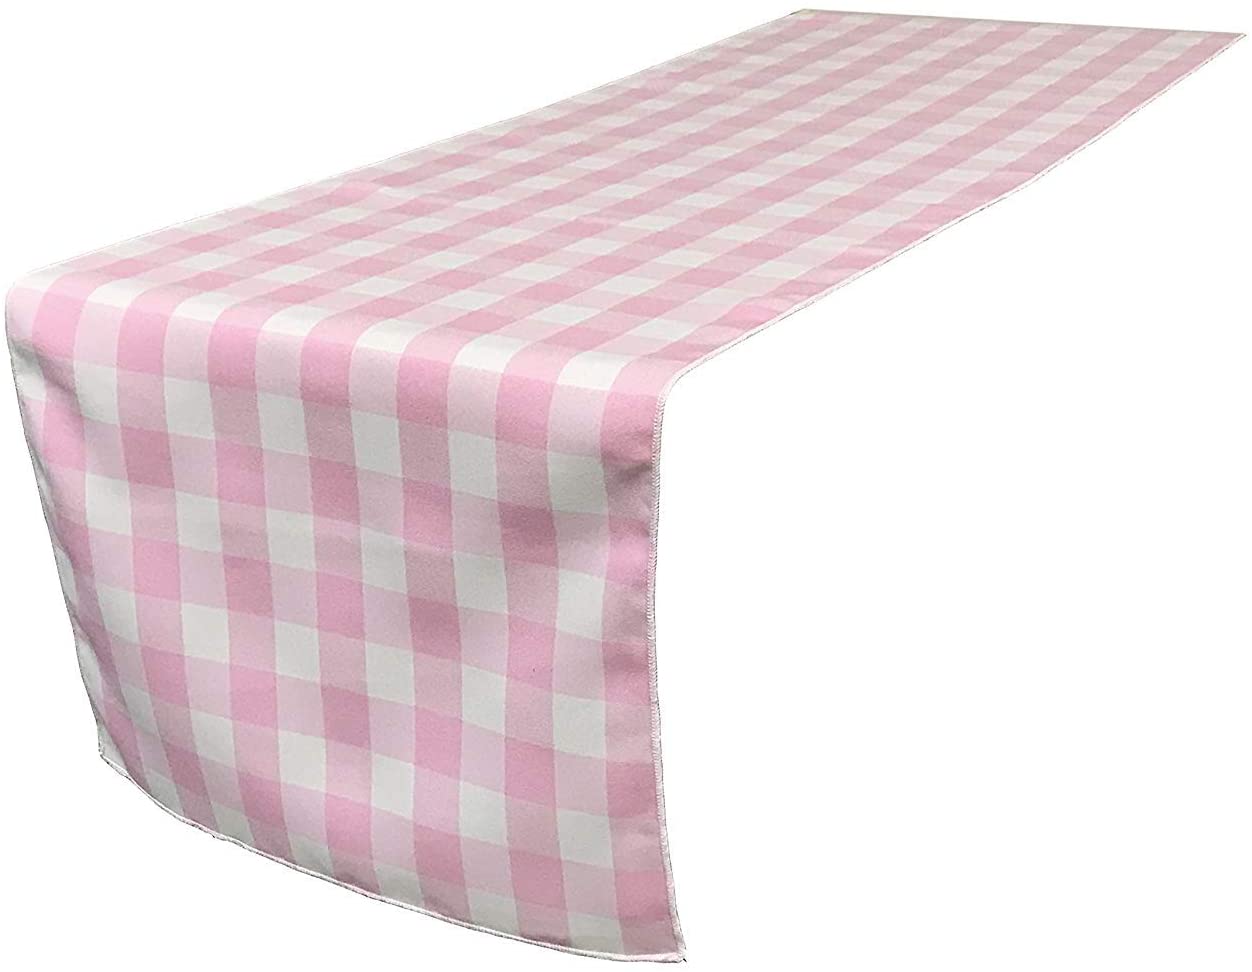 12" Wide by The Size of Your Choice, Polyester Poplin Gingham, Checkered, Plaid Table Runner (White & Light Pink,